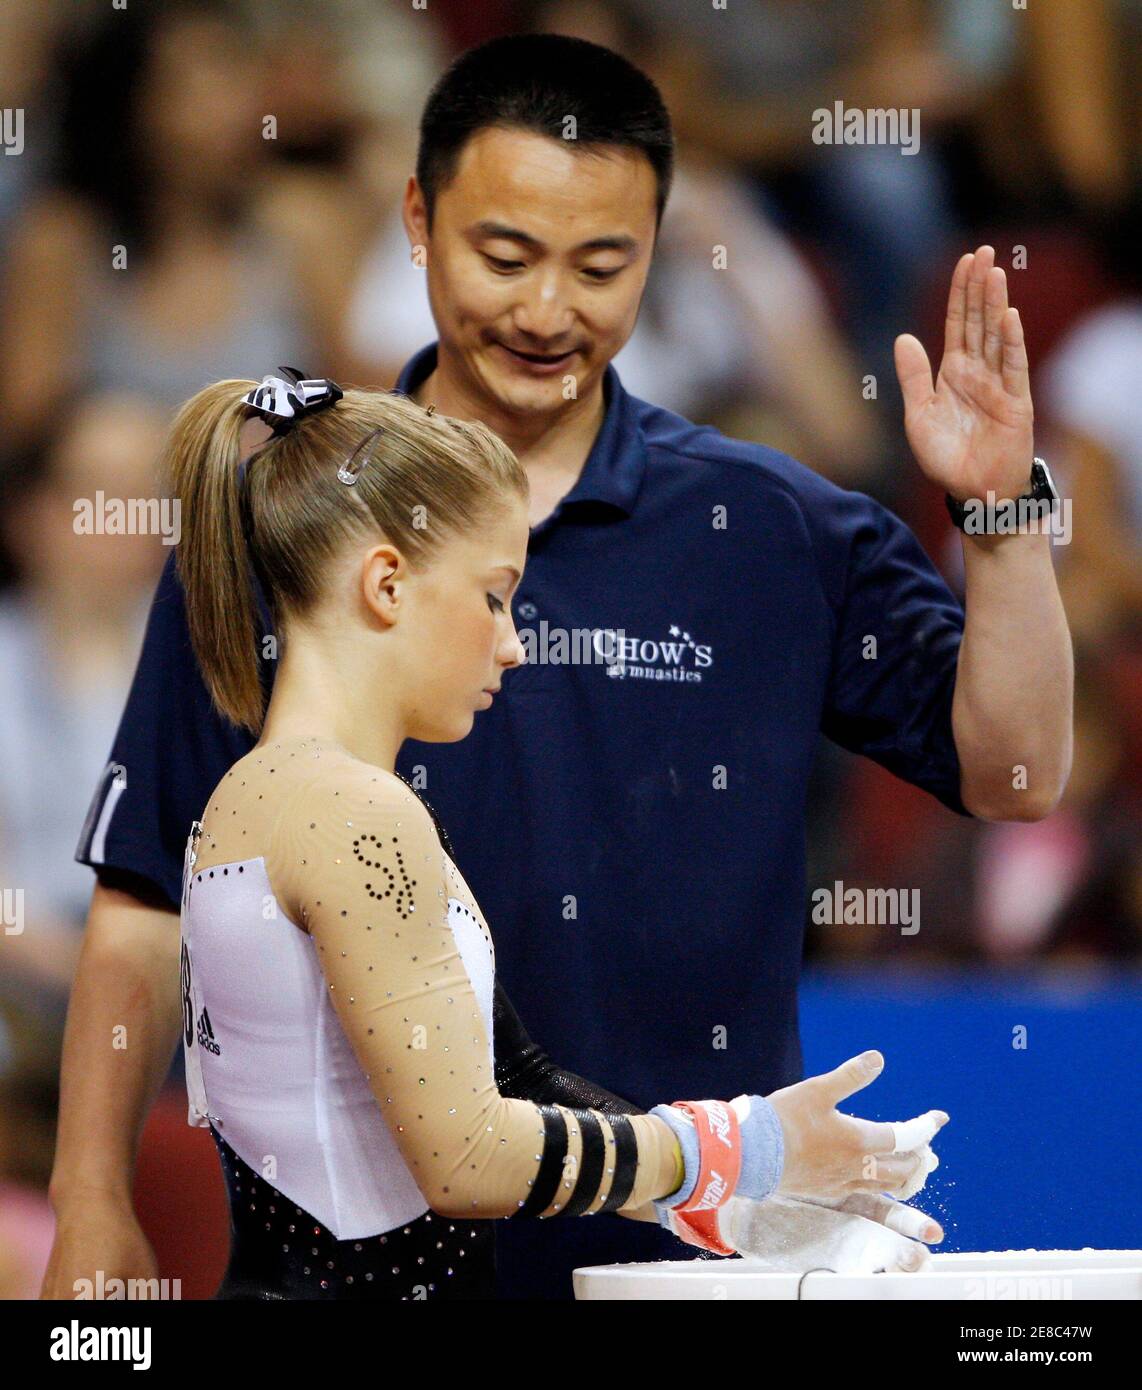 Shawn Johnson (front) listens to her coach Liang Chow before she competes  on the uneven bars at the . Women's Gymnastics Championships in Boston,  Massachusetts, June 7, 2008. REUTERS/Brian Snyder (UNITED STATES